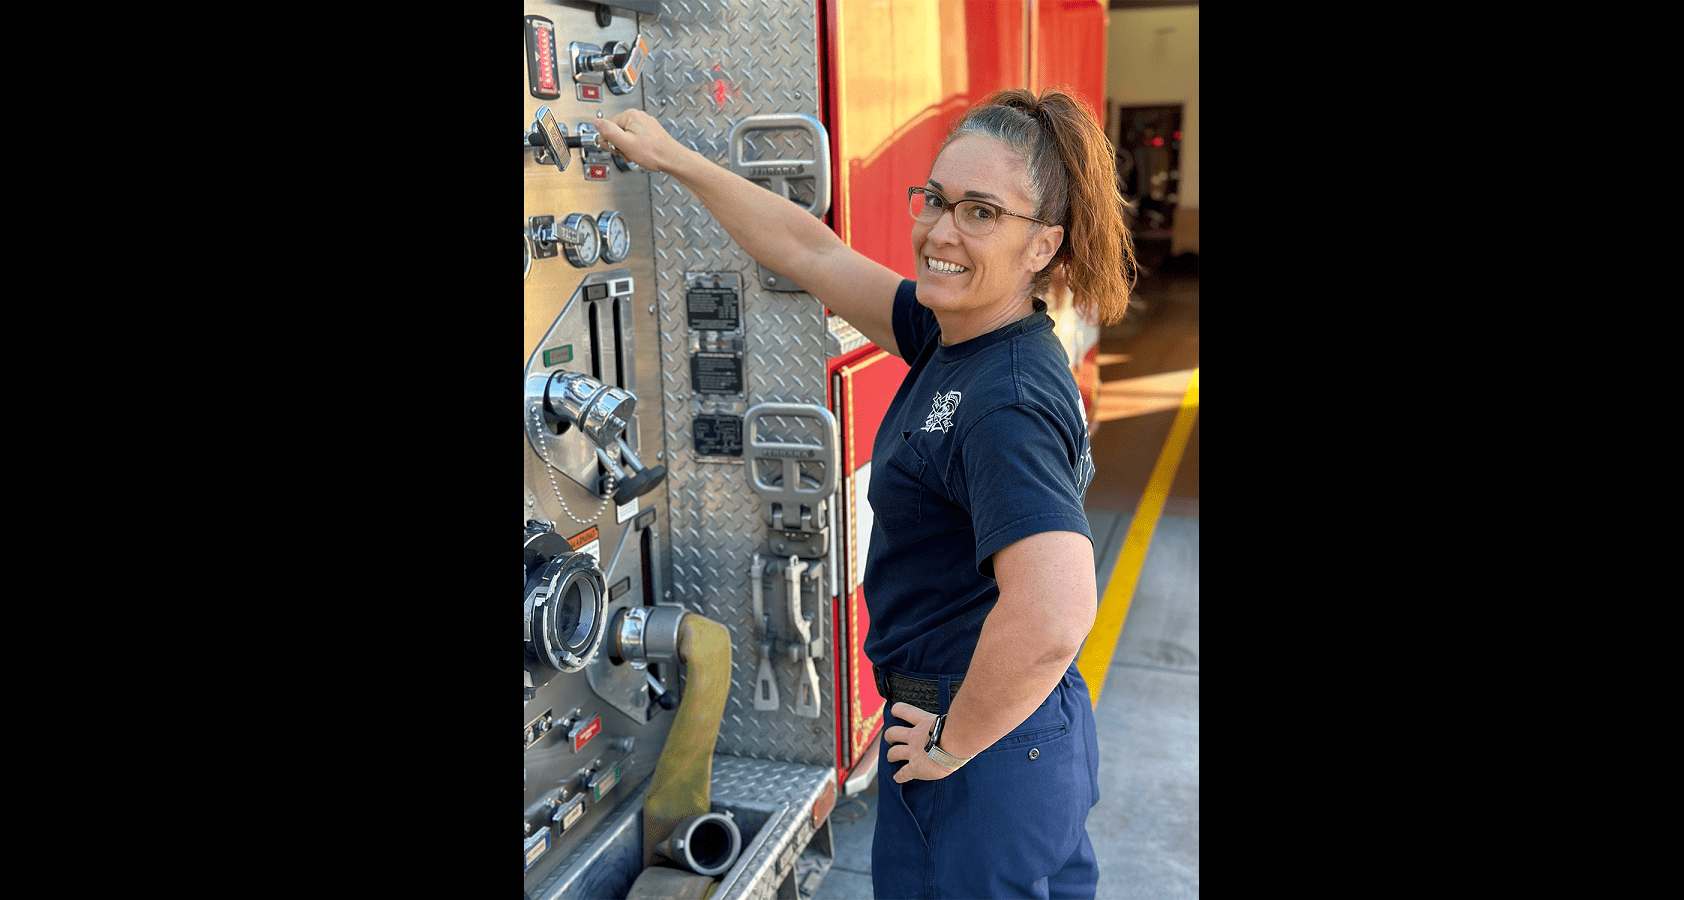 jessie-taintor-fire-engineer-for-the-santa-rosa-fire-department-srfd